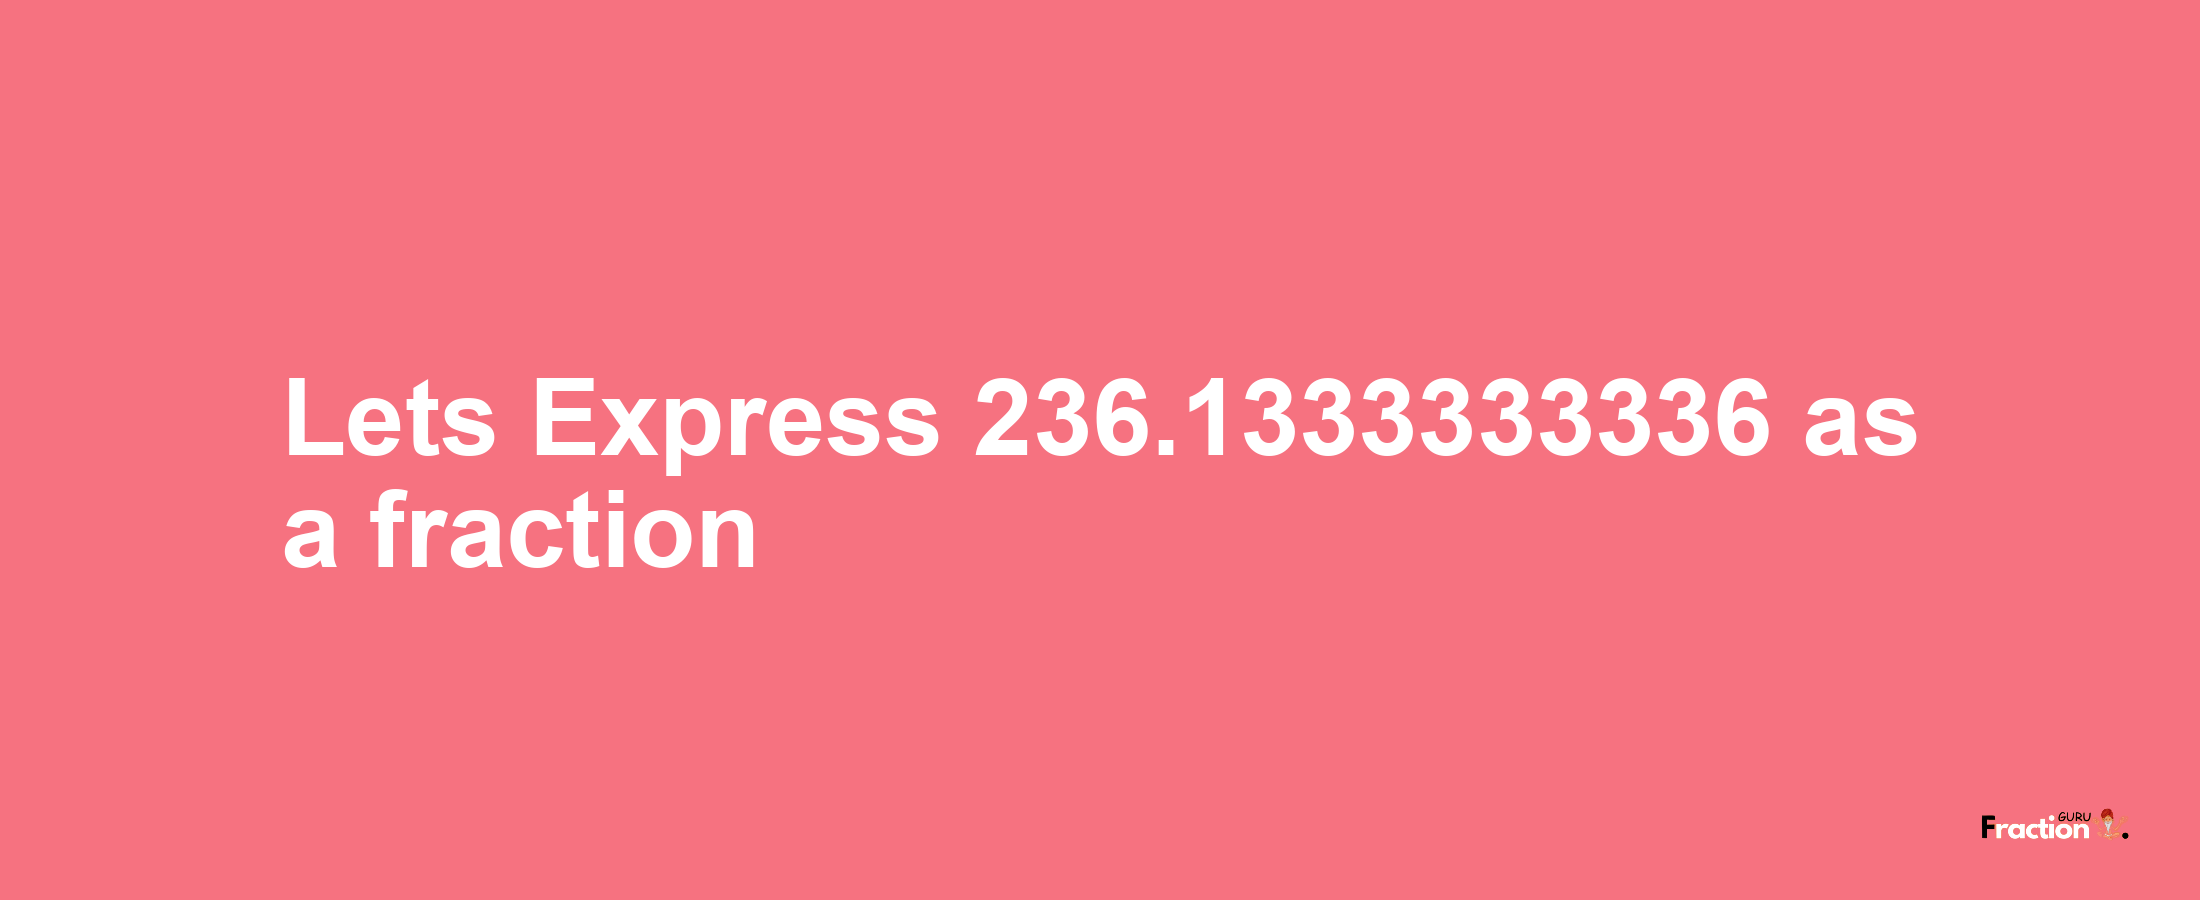 Lets Express 236.1333333336 as afraction